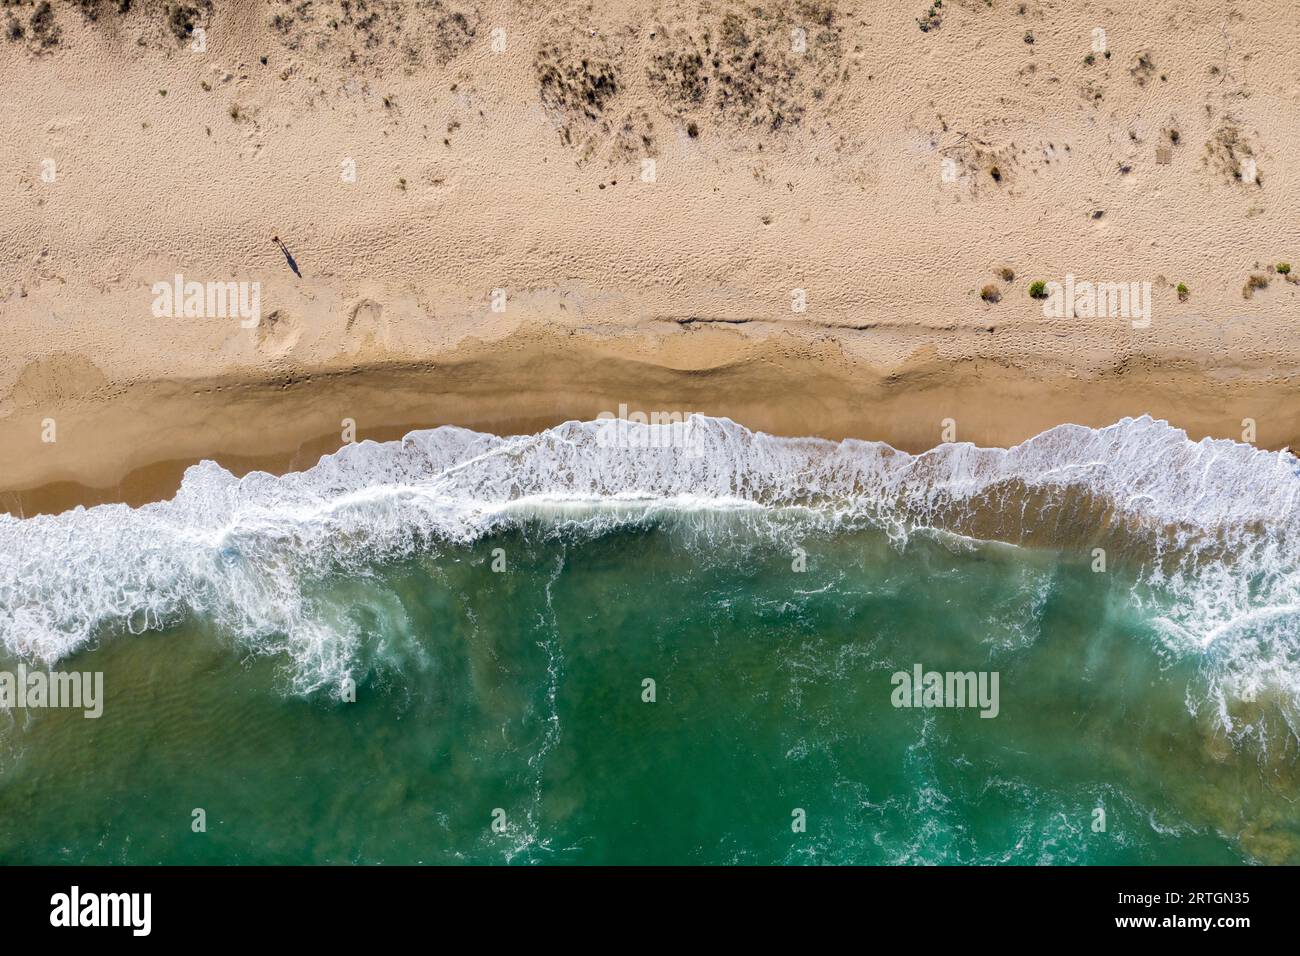 Aerial view of ocean waves washing a secluded sandy shoreline beach Stock Photo